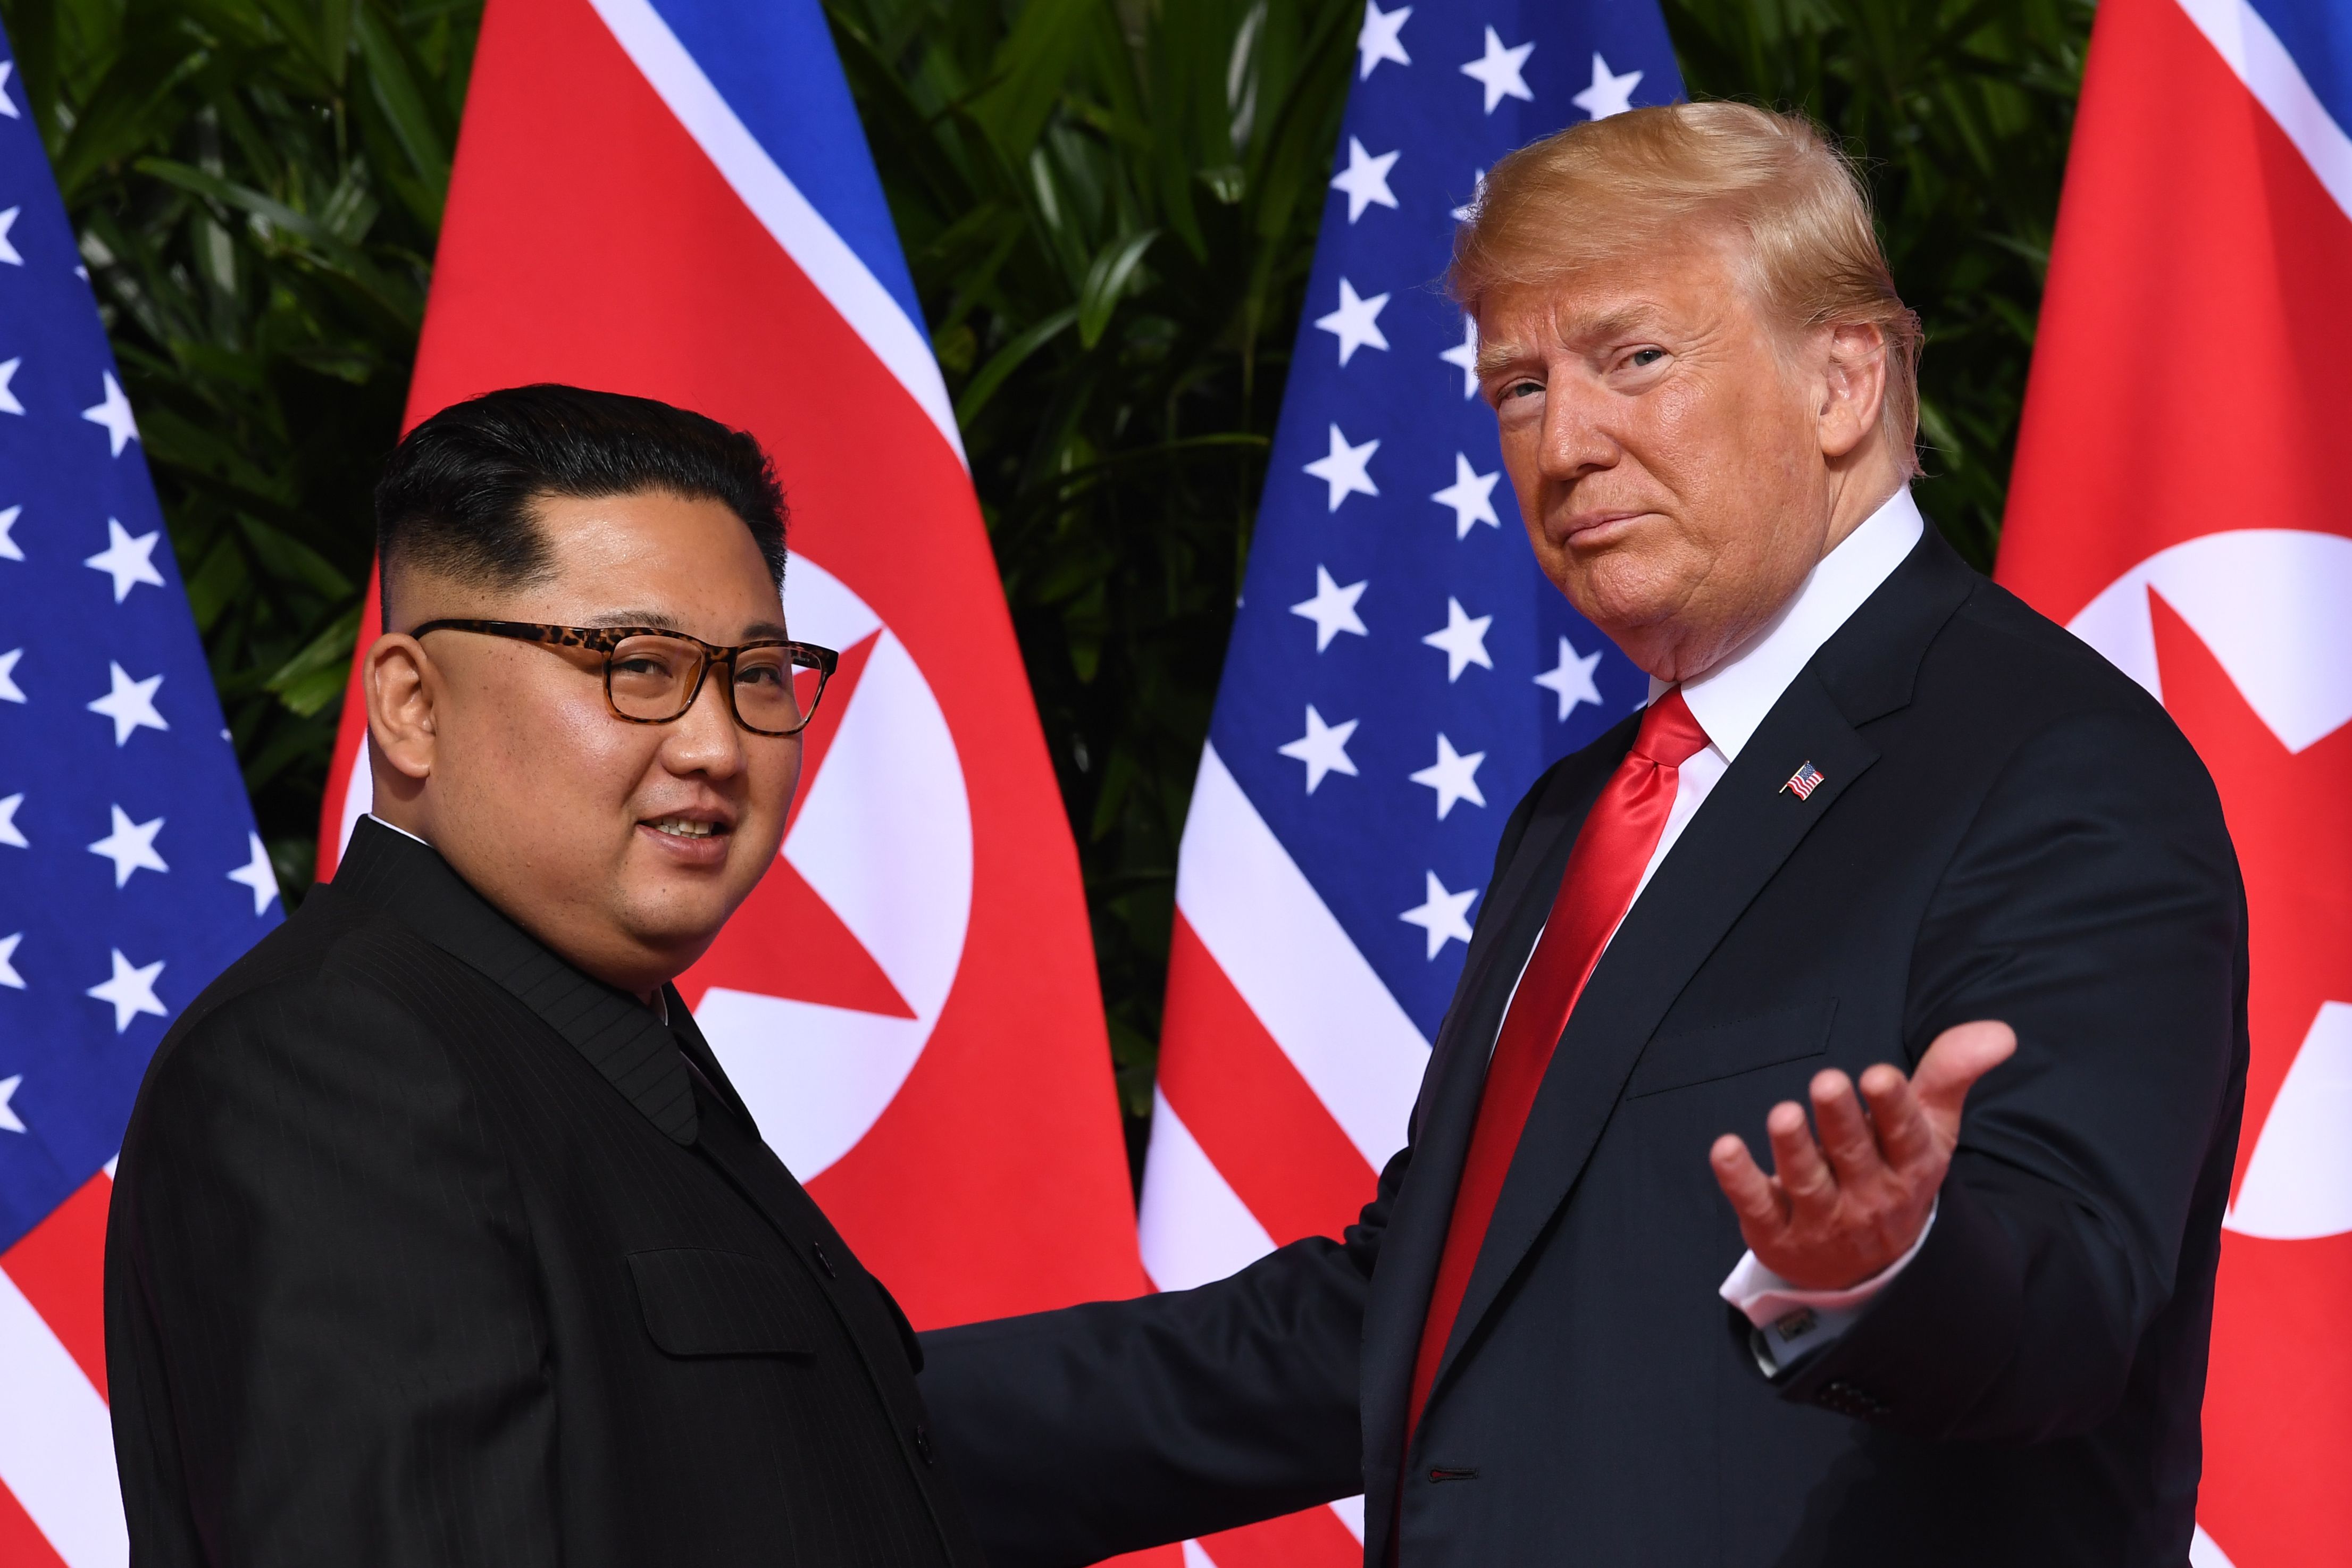 President Donald Trump (R) gestures as he meets with North Korea's leader Kim Jong Un (L) at the start of their summit in Singapore on June 12, 2018. (Saul Loeb—AFP/Getty Images)